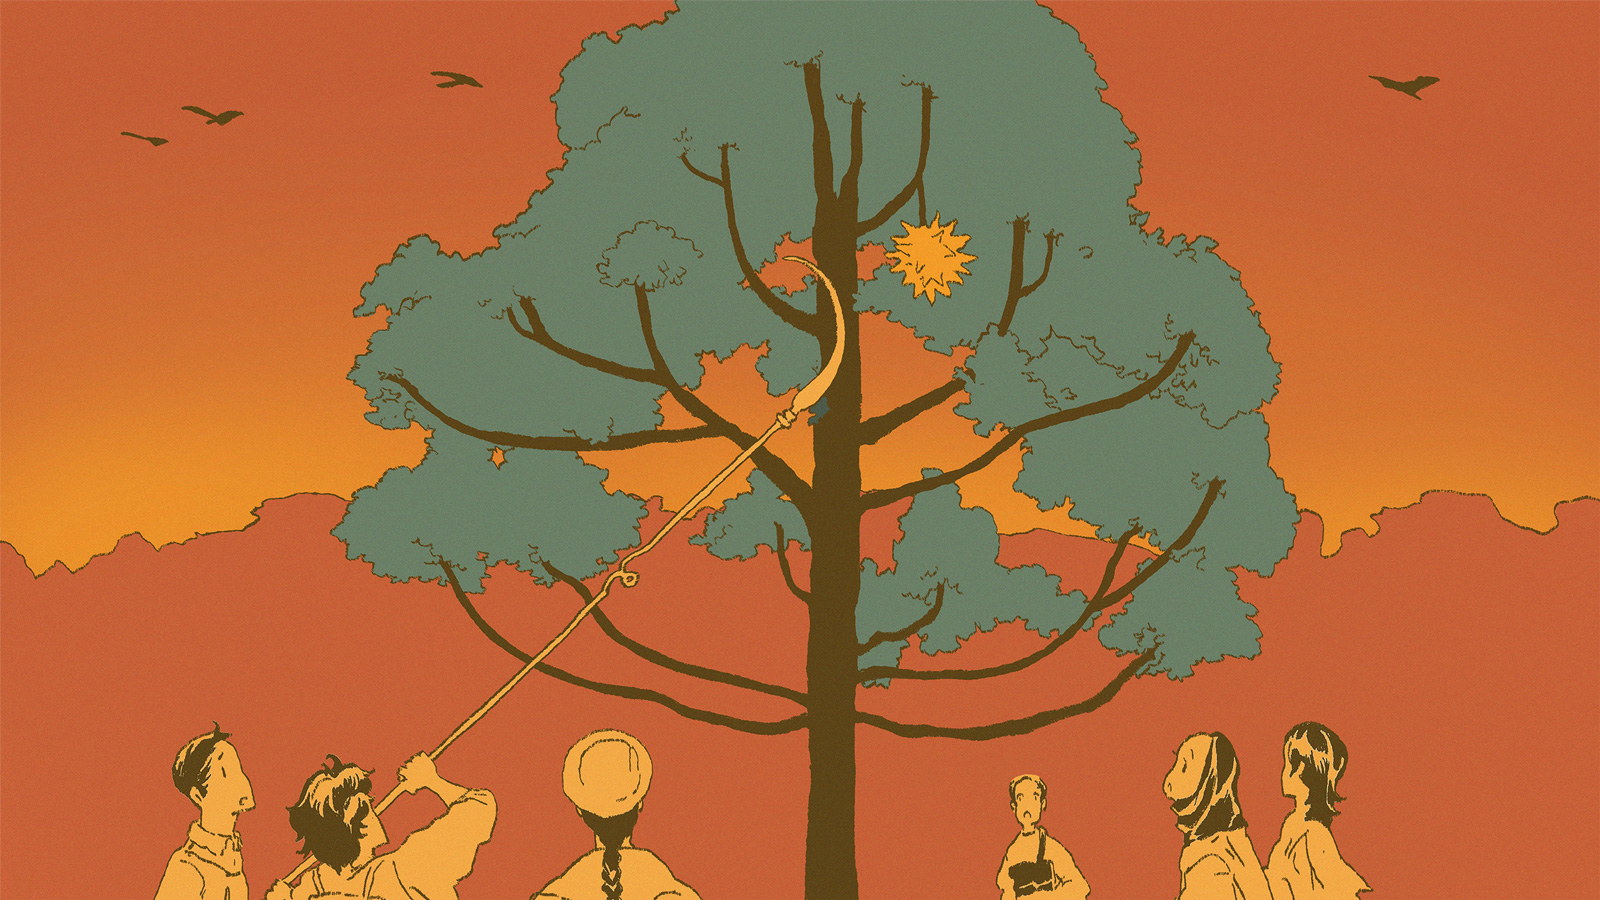 A tree with green leaves bears a single golden durian high up in its branches. It stands in the middle of the picture. Below it are various individuals dressed in Southeast Asian clothing, gathered around the tree. One of them tries to use a long pole to harvest the single durian.